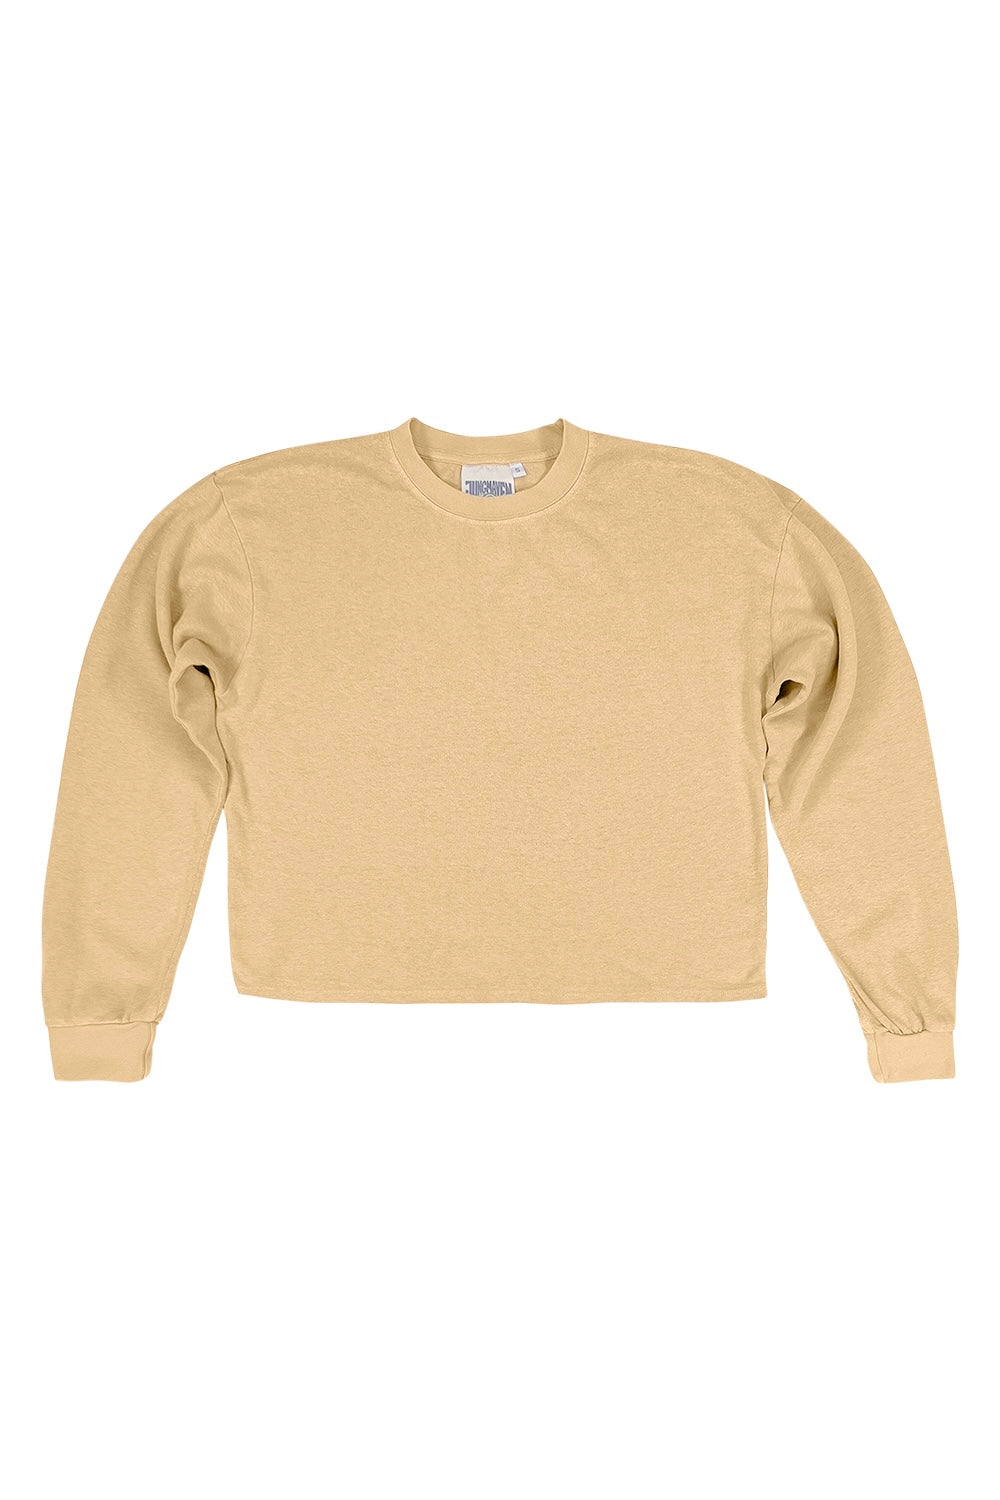 Cropped Long Sleeve Tee | Jungmaven Hemp Clothing & Accessories / Color: Oat Milk